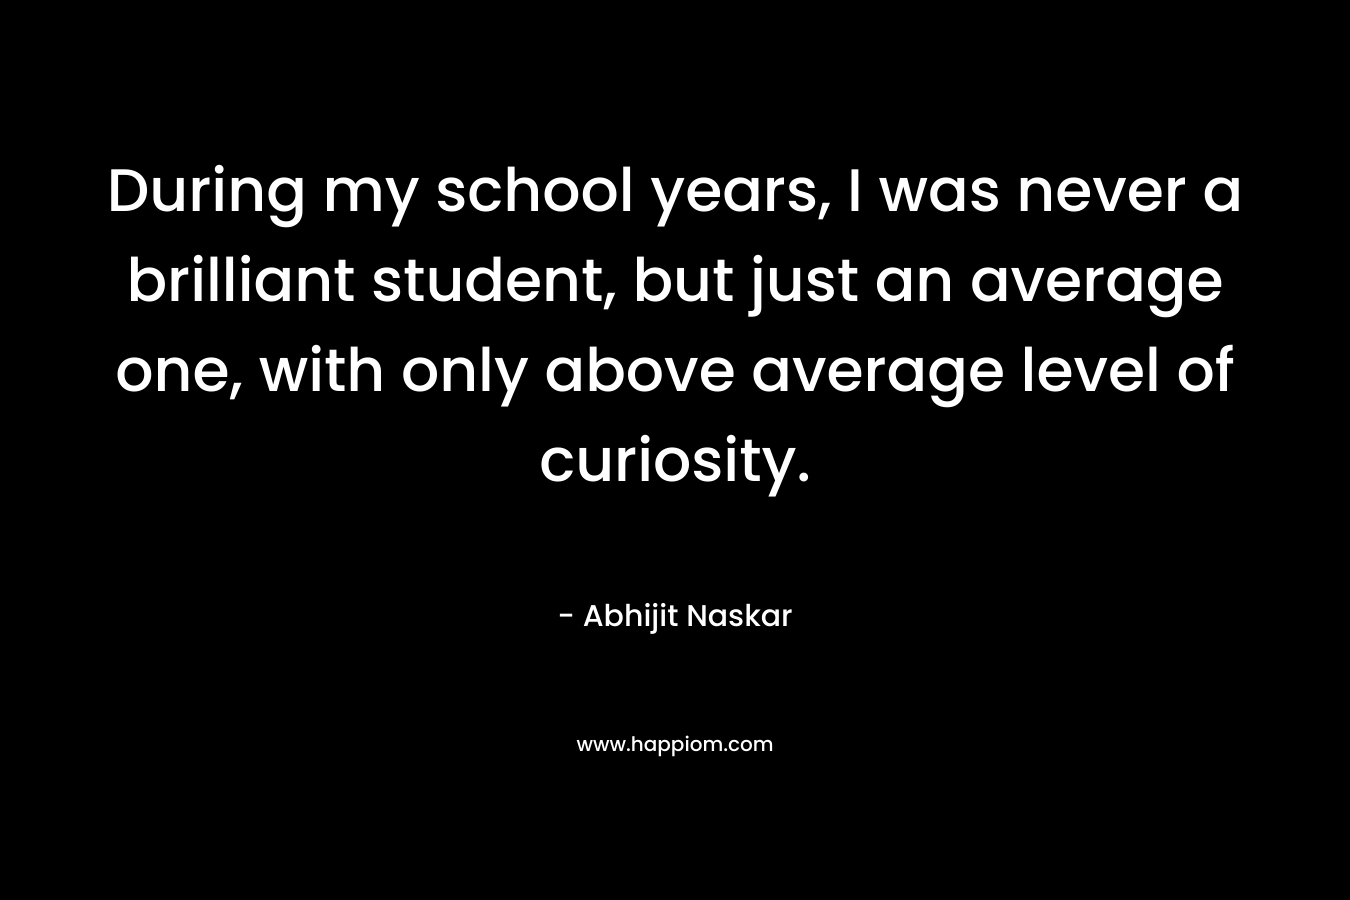 During my school years, I was never a brilliant student, but just an average one, with only above average level of curiosity.